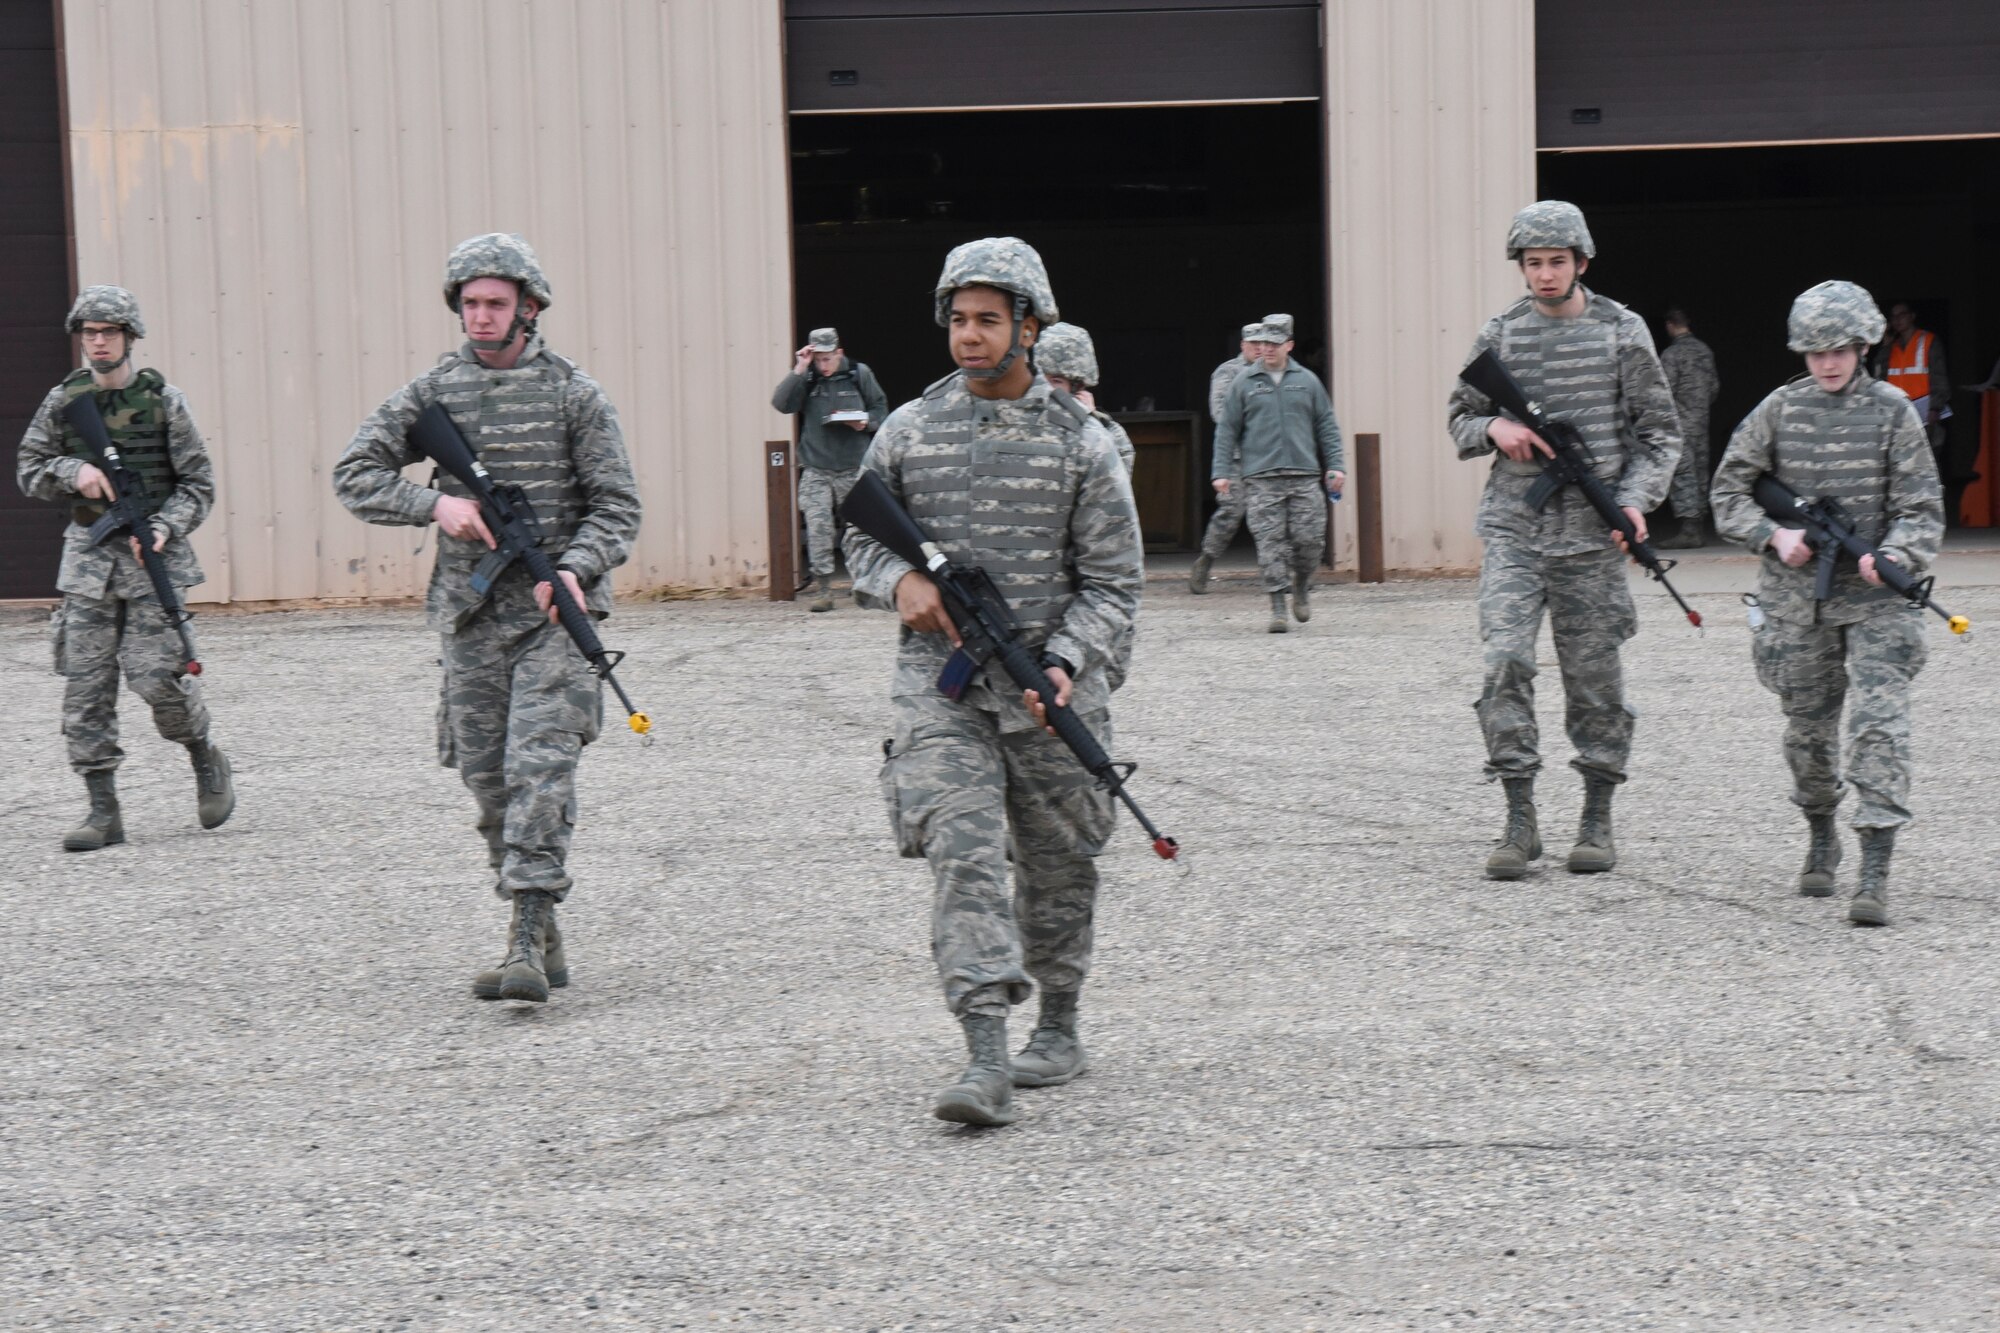 Members from the ROTC program at the University of North Dakota, participate in a readiness exercise on Grand Forks Air Force Base, N.D., April 21, 2018. The Airmen were given a task and then divided up into different teams for each station. (U.S. Air Force photo by Airman 1st Class Melody Wolff)